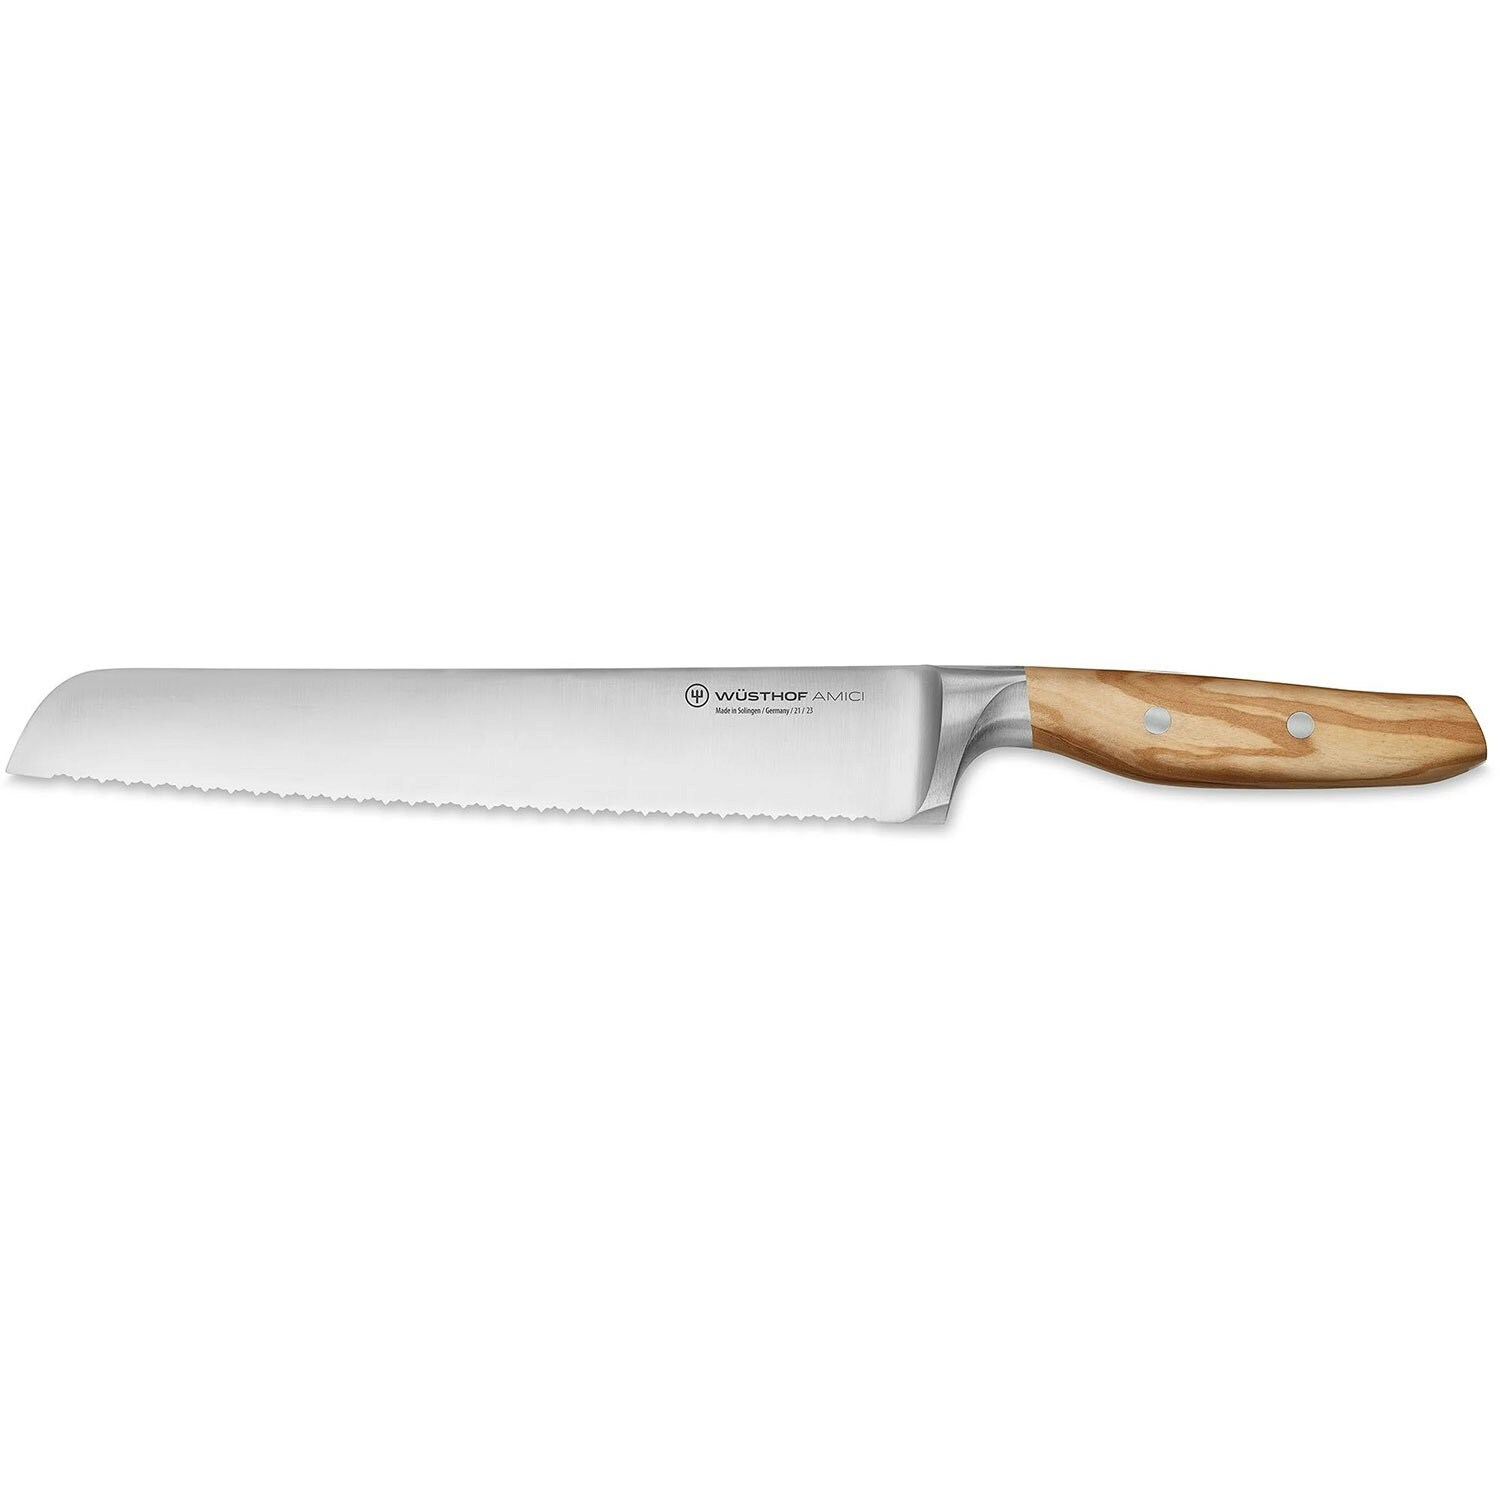 https://royaldesign.com/image/2/wusthof-amici-bread-knife-double-toothed-23-cm-olive-wood-0